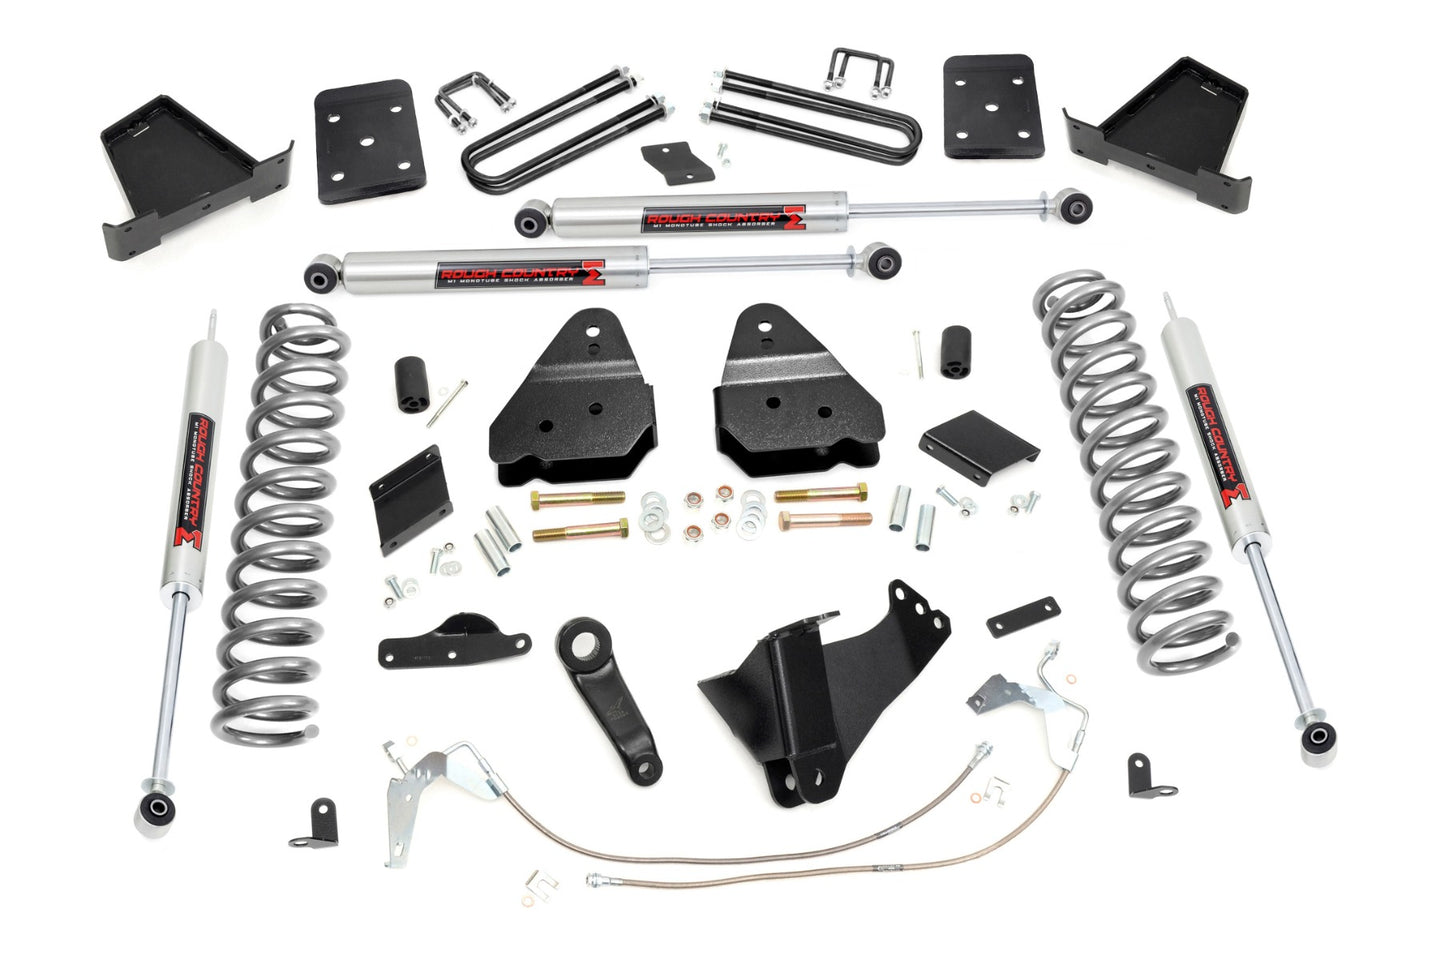 6 Inch Lift Kit | Gas | No OVLD | M1 | Ford F-250 Super Duty (11-14)